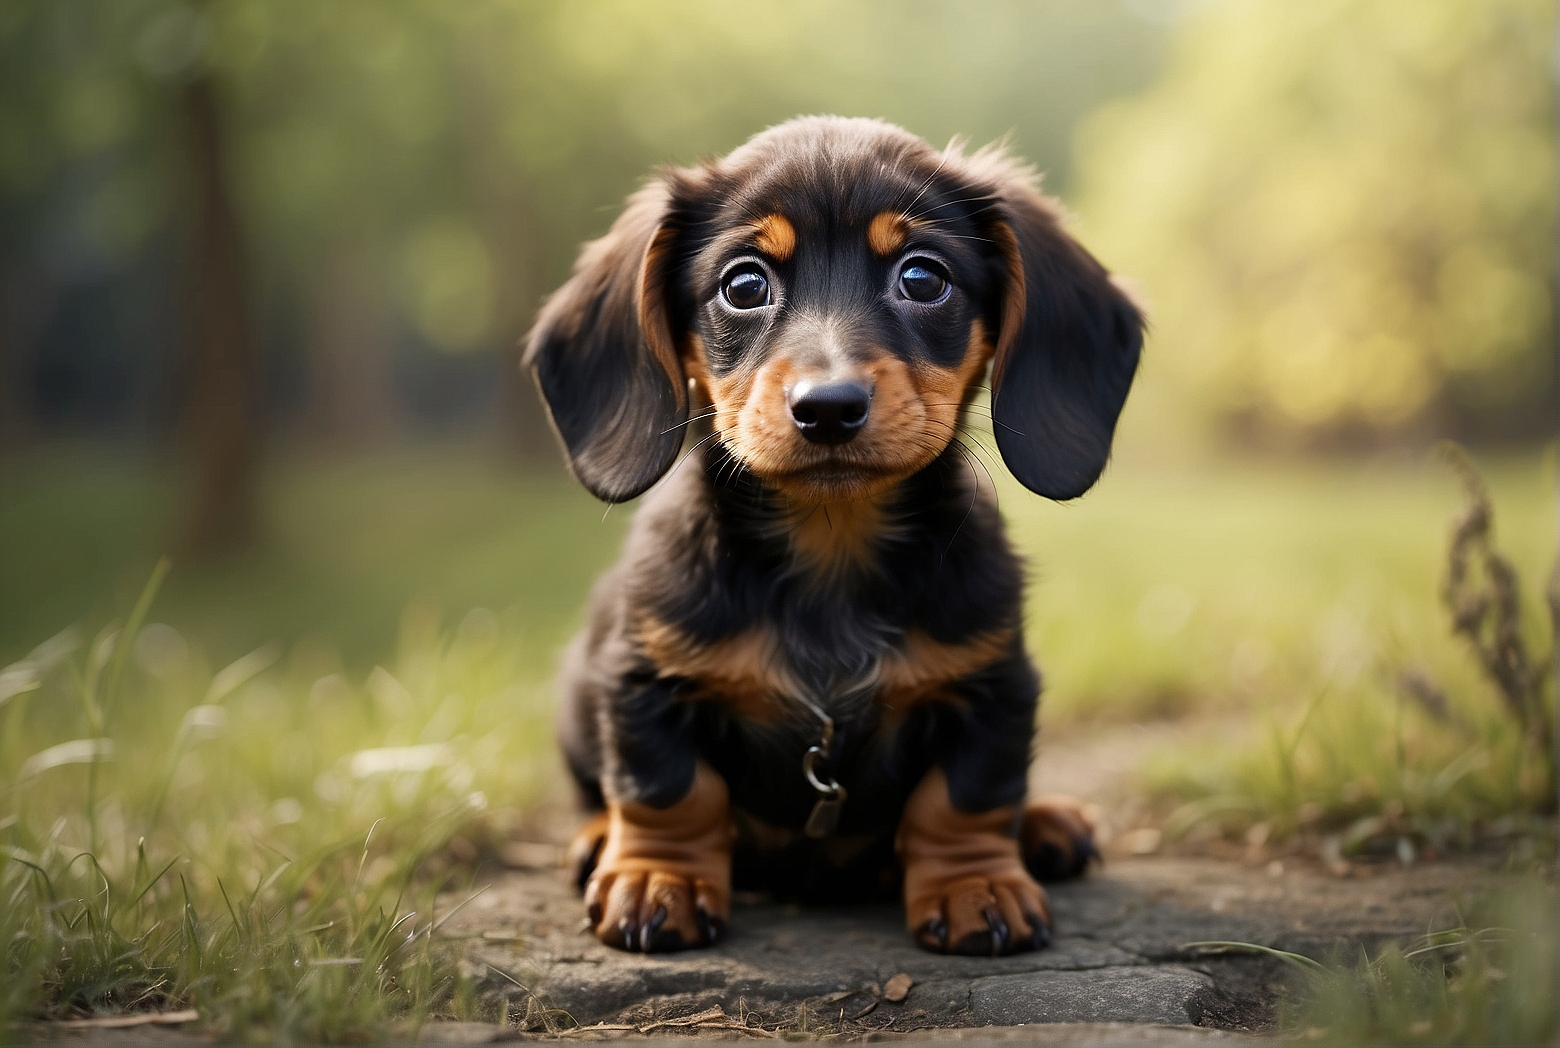 How To Train Dachshund Puppy Not To Bite